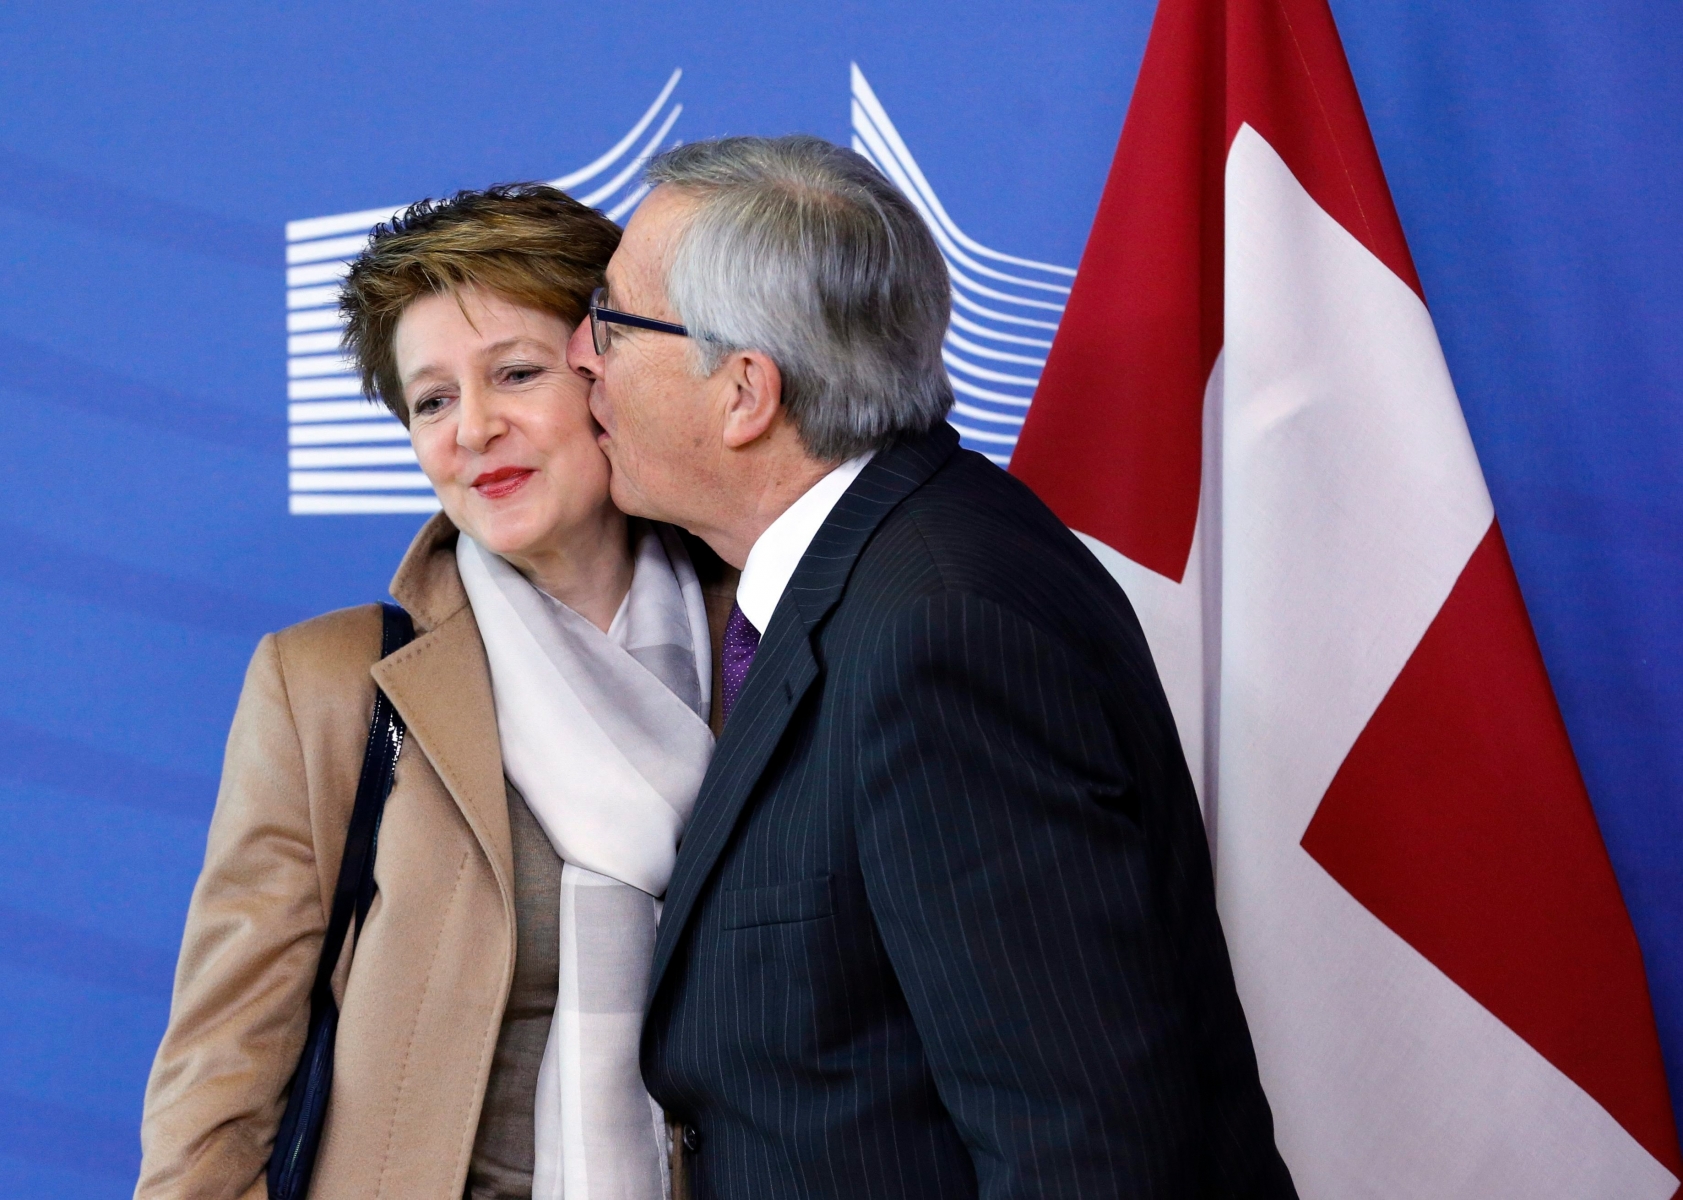 epa04601088 European Commission President Jean-Claude Juncker (R) welcomes Swiss President Simonetta Sommaruga (L) prior to a meeting at EU commission headquarters in Brussels, Belgium, 02 February 2015. A controversial Swiss referendum that will curb immigration set Switzerland on a collision course with the European Union, as the planned immigration curbs run counter to the Swiss-EU agreement on freedom of movement.  EPA/OLIVIER HOSLET BELGIUM EU SWITZERLAND DIPLOMACY